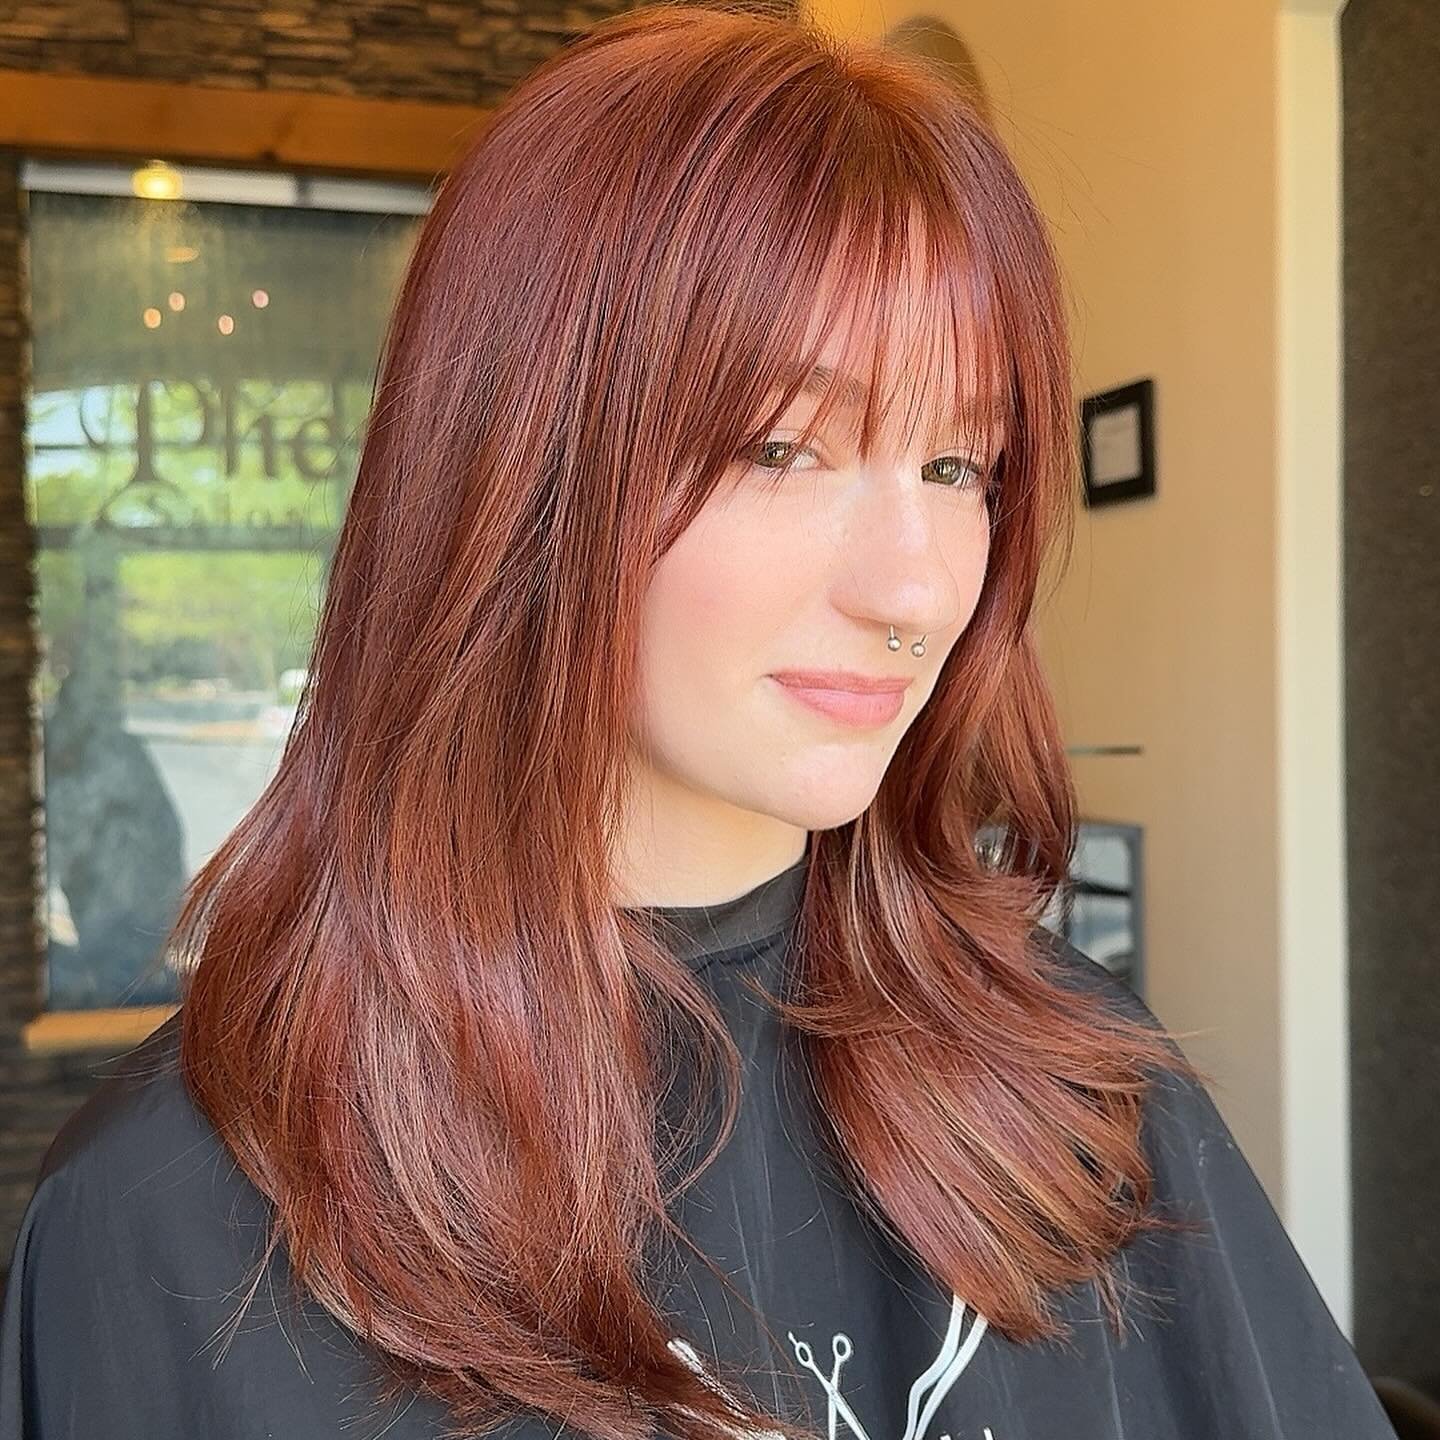 GUURL you look expansive. 

#copperbrown #copperredhair #cowgirlcopper #hairtrends #oldmoney #alpharettahairstylist